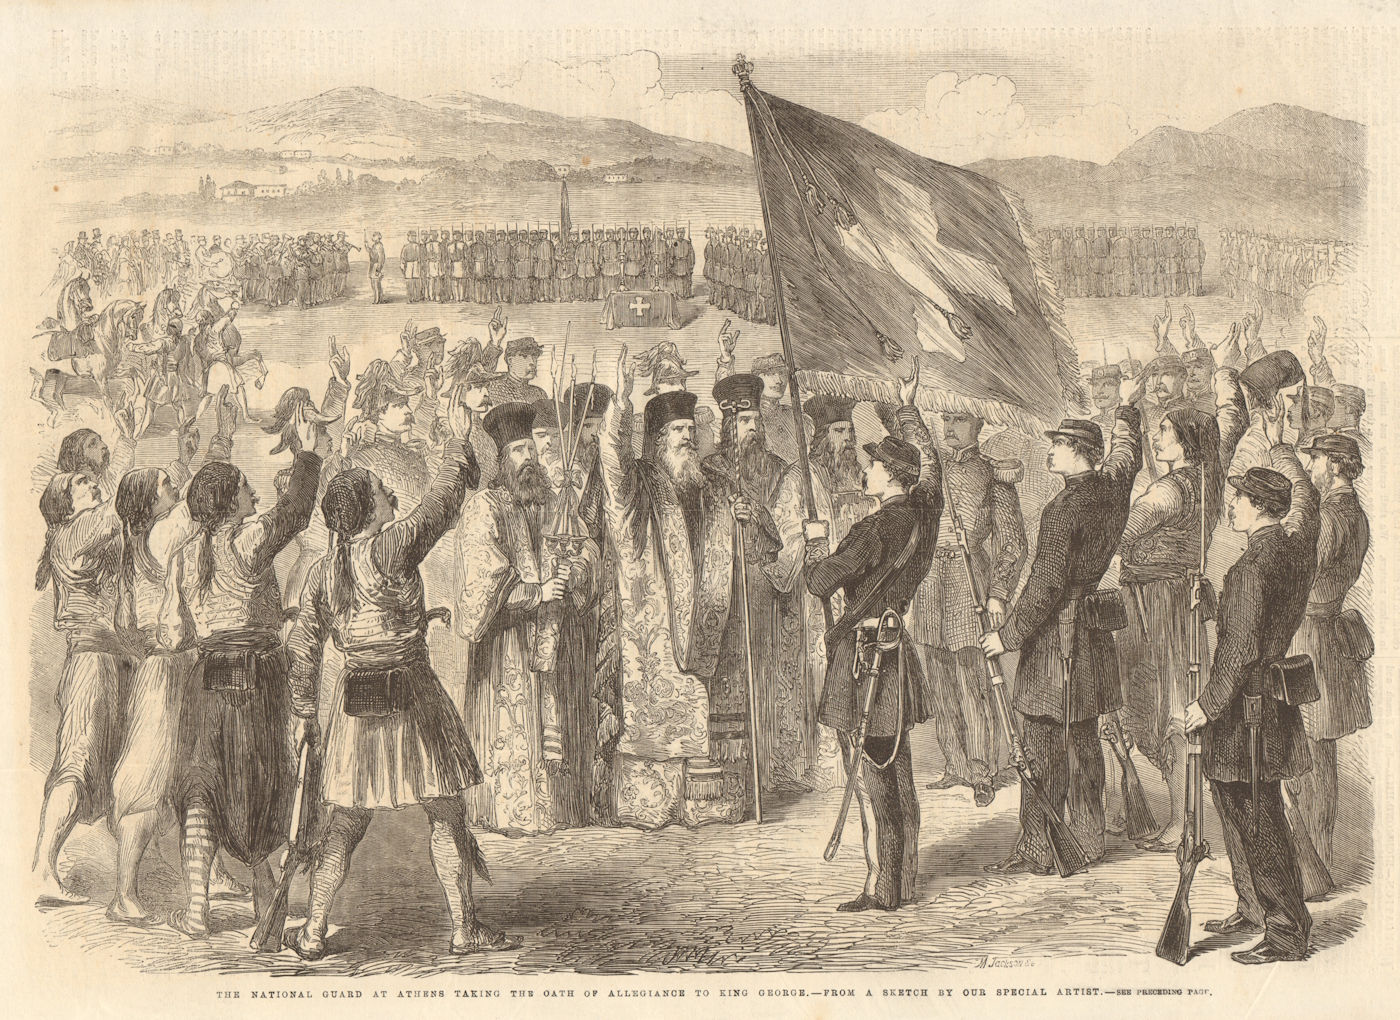 Associate Product The National Guard at Athens swearing allegiance to King George. Greece 1863